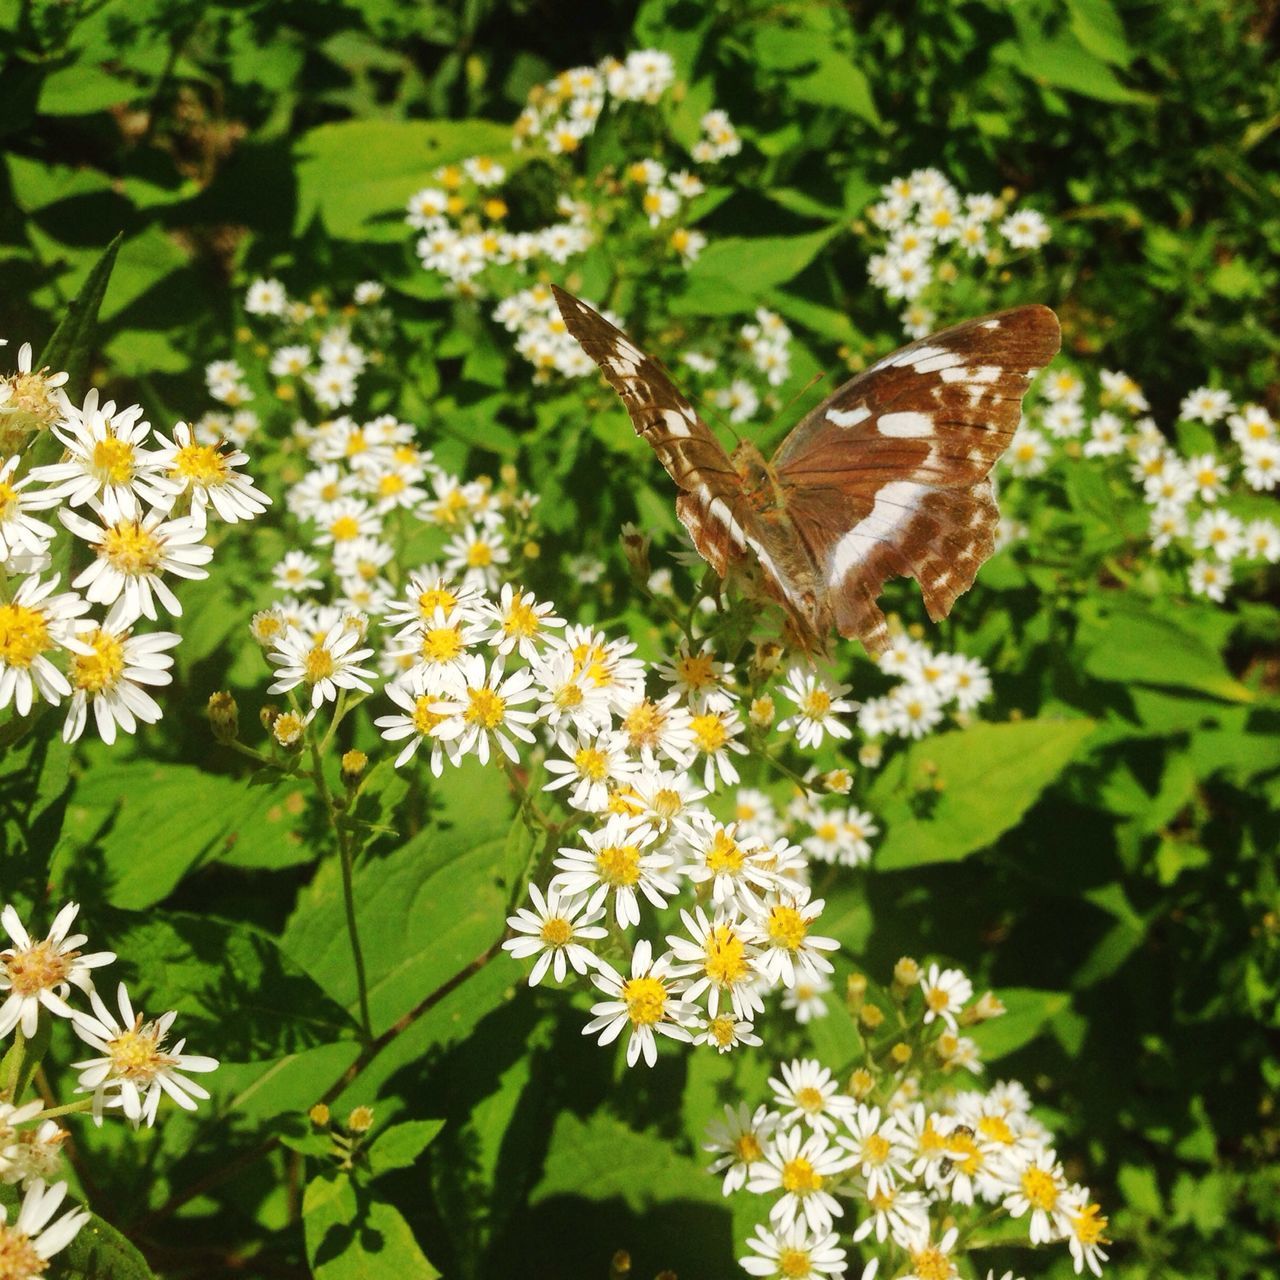 CLOSE-UP OF BUTTERFLY ON FLOWERS